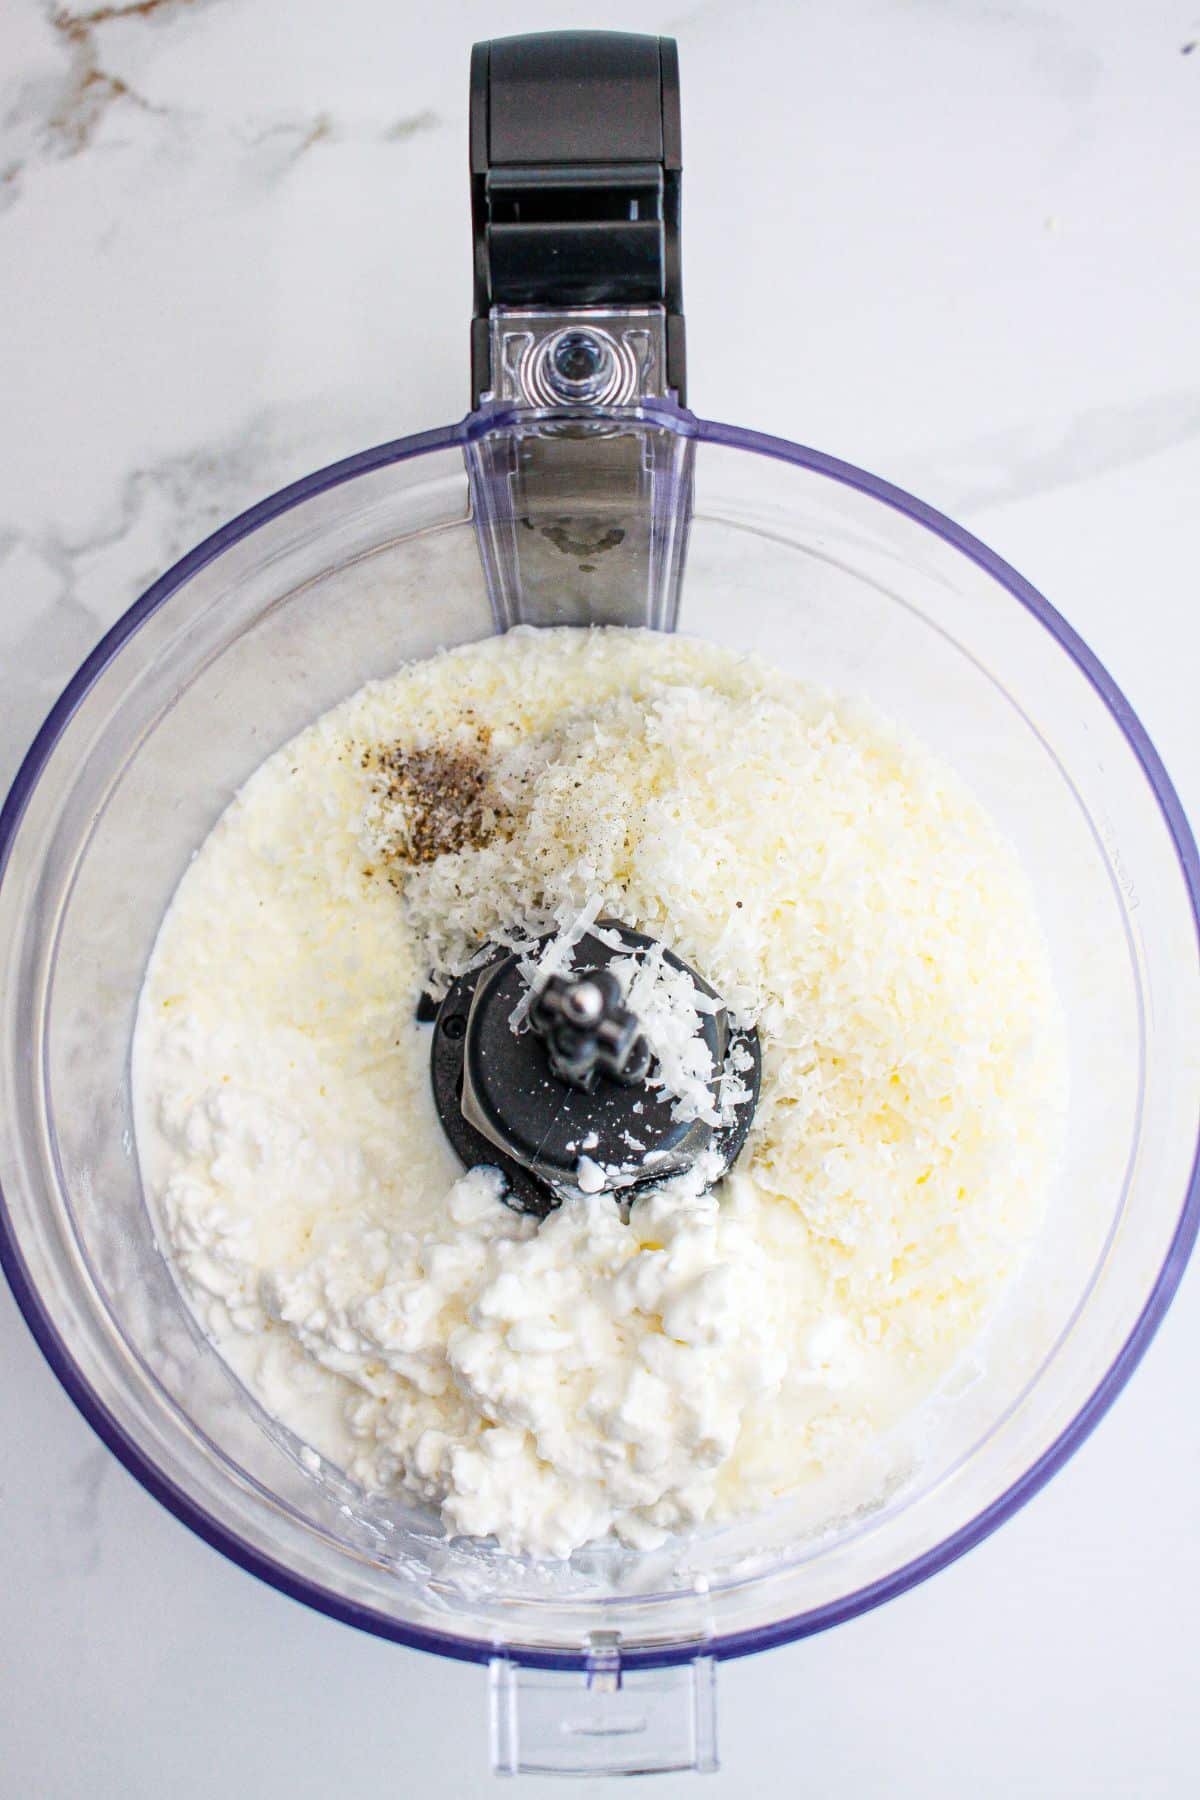 cottage cheese, parmesan cheese, salt and pepper being blended in a food processor.